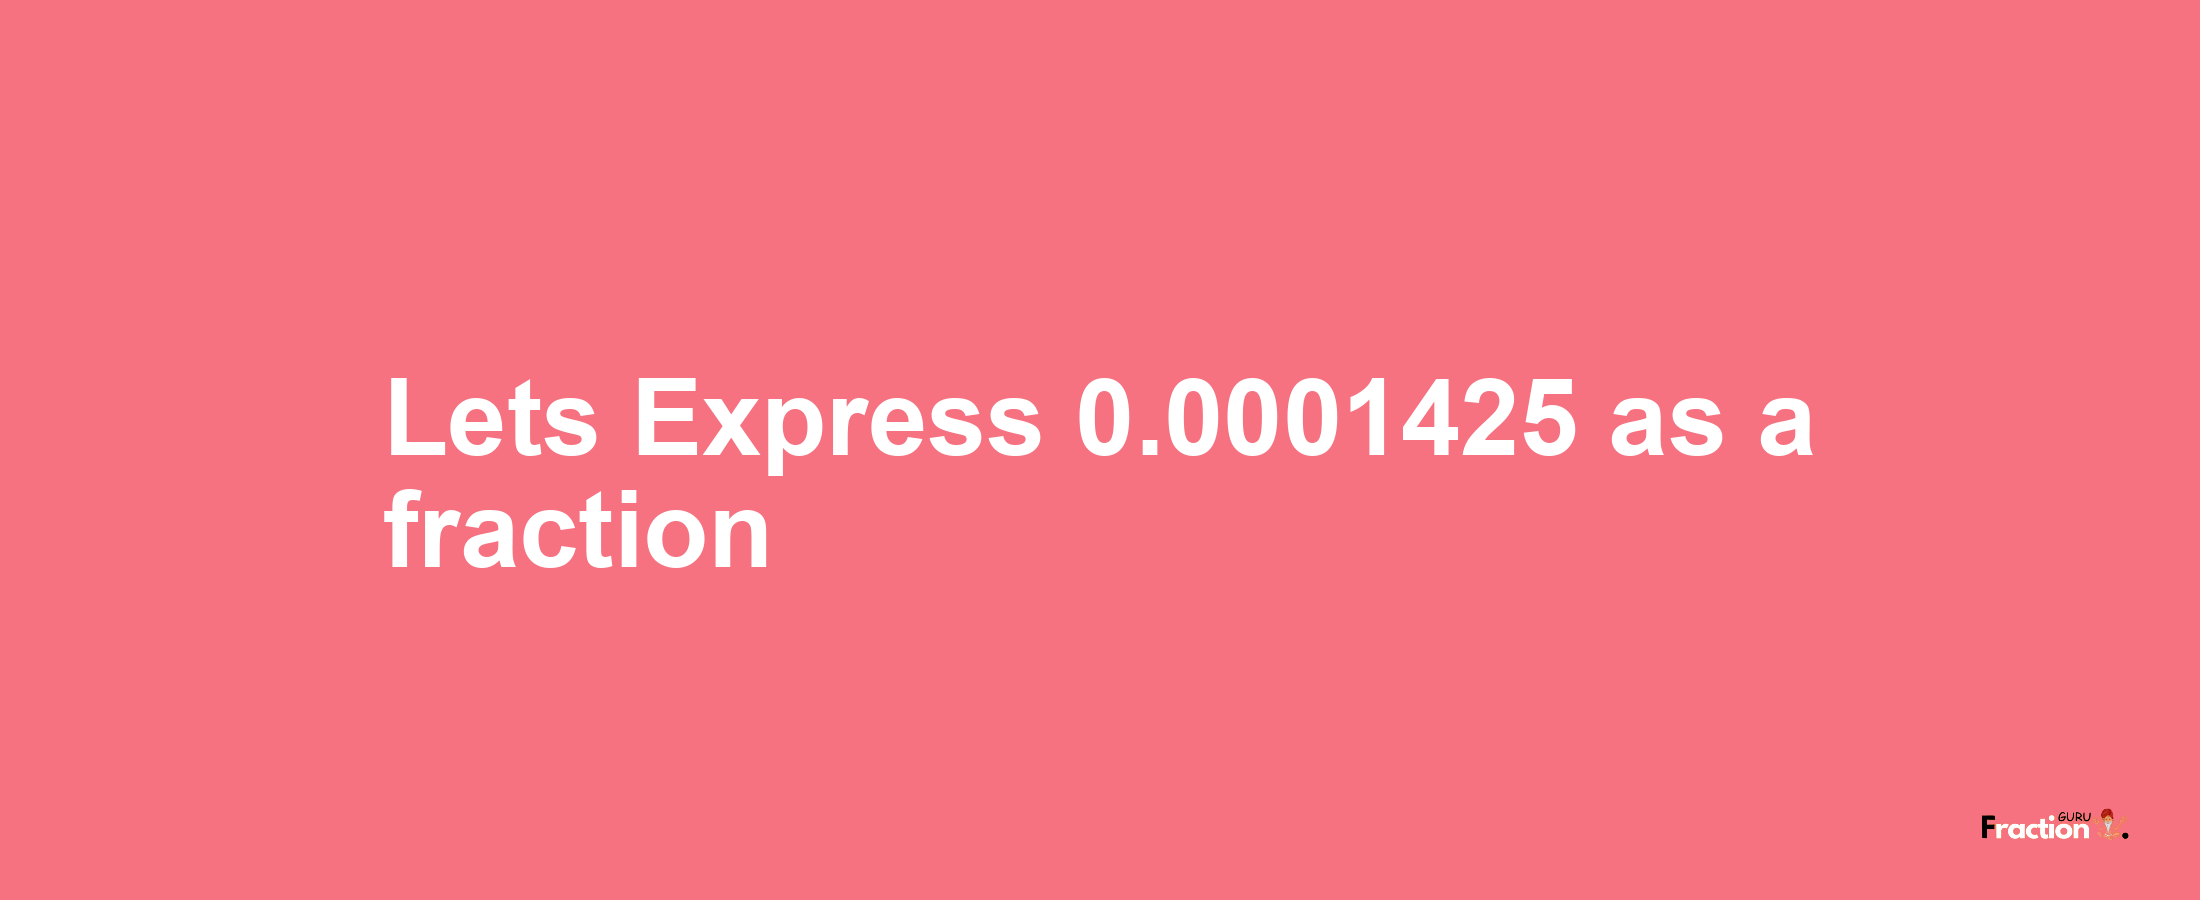 Lets Express 0.0001425 as afraction